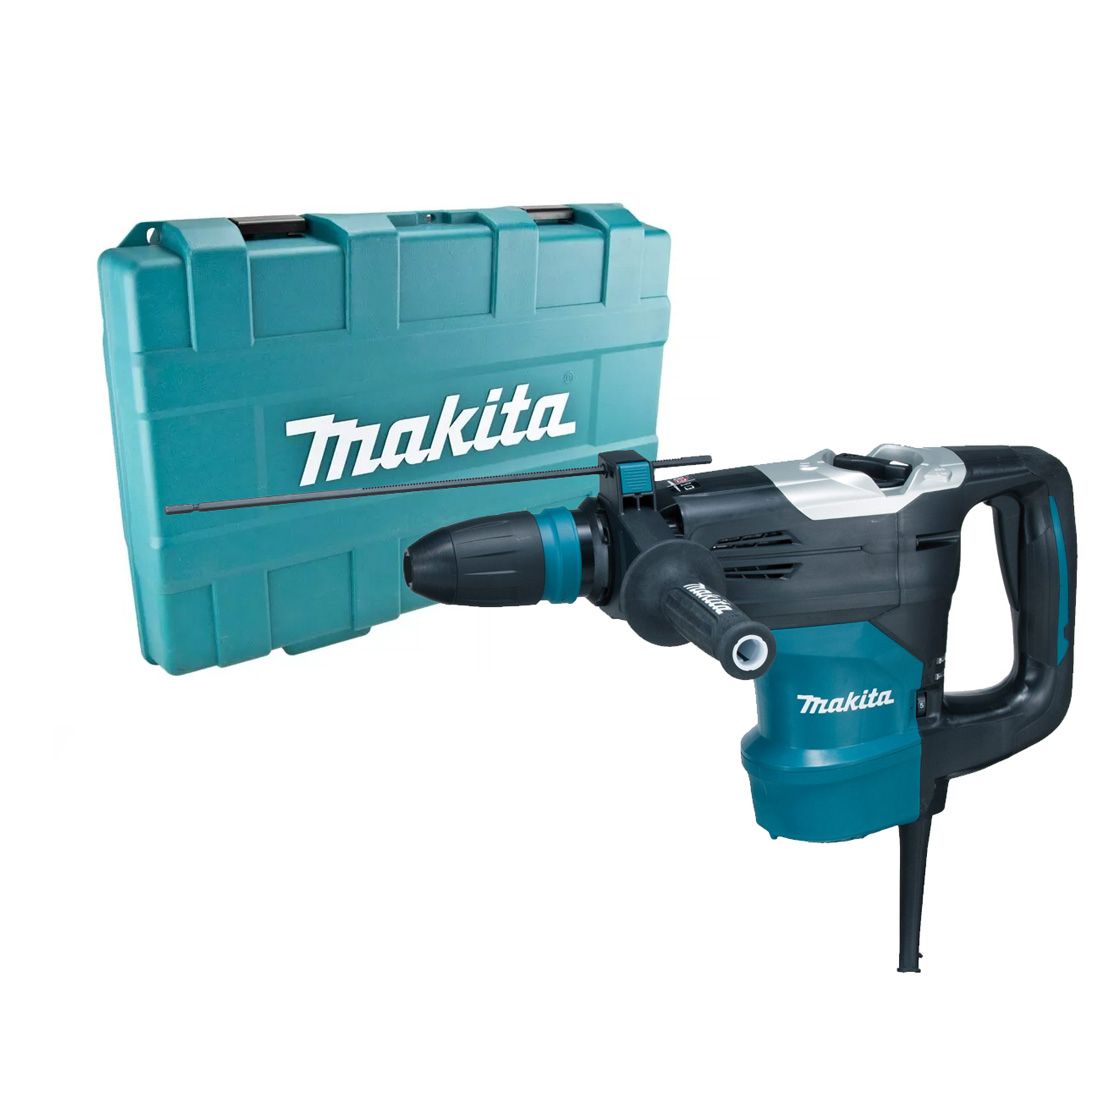 Makita HR4003C/2 SDS-Max Rotary Hammer Drill 240V with Carry Case